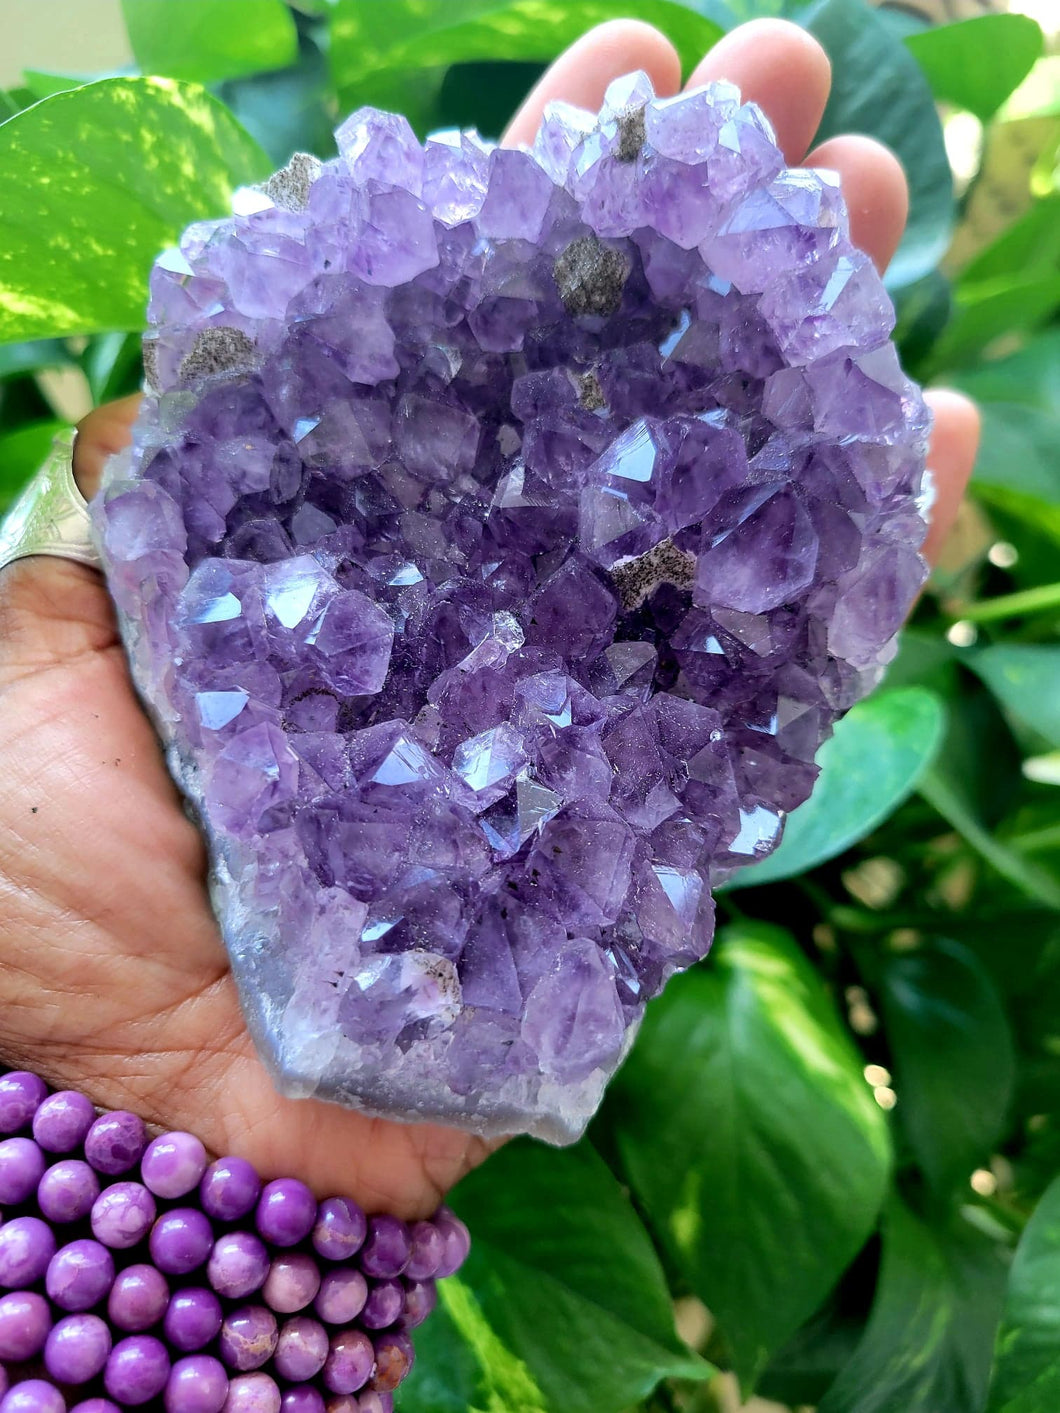 Large Amethyst Crystal Cluster 6A